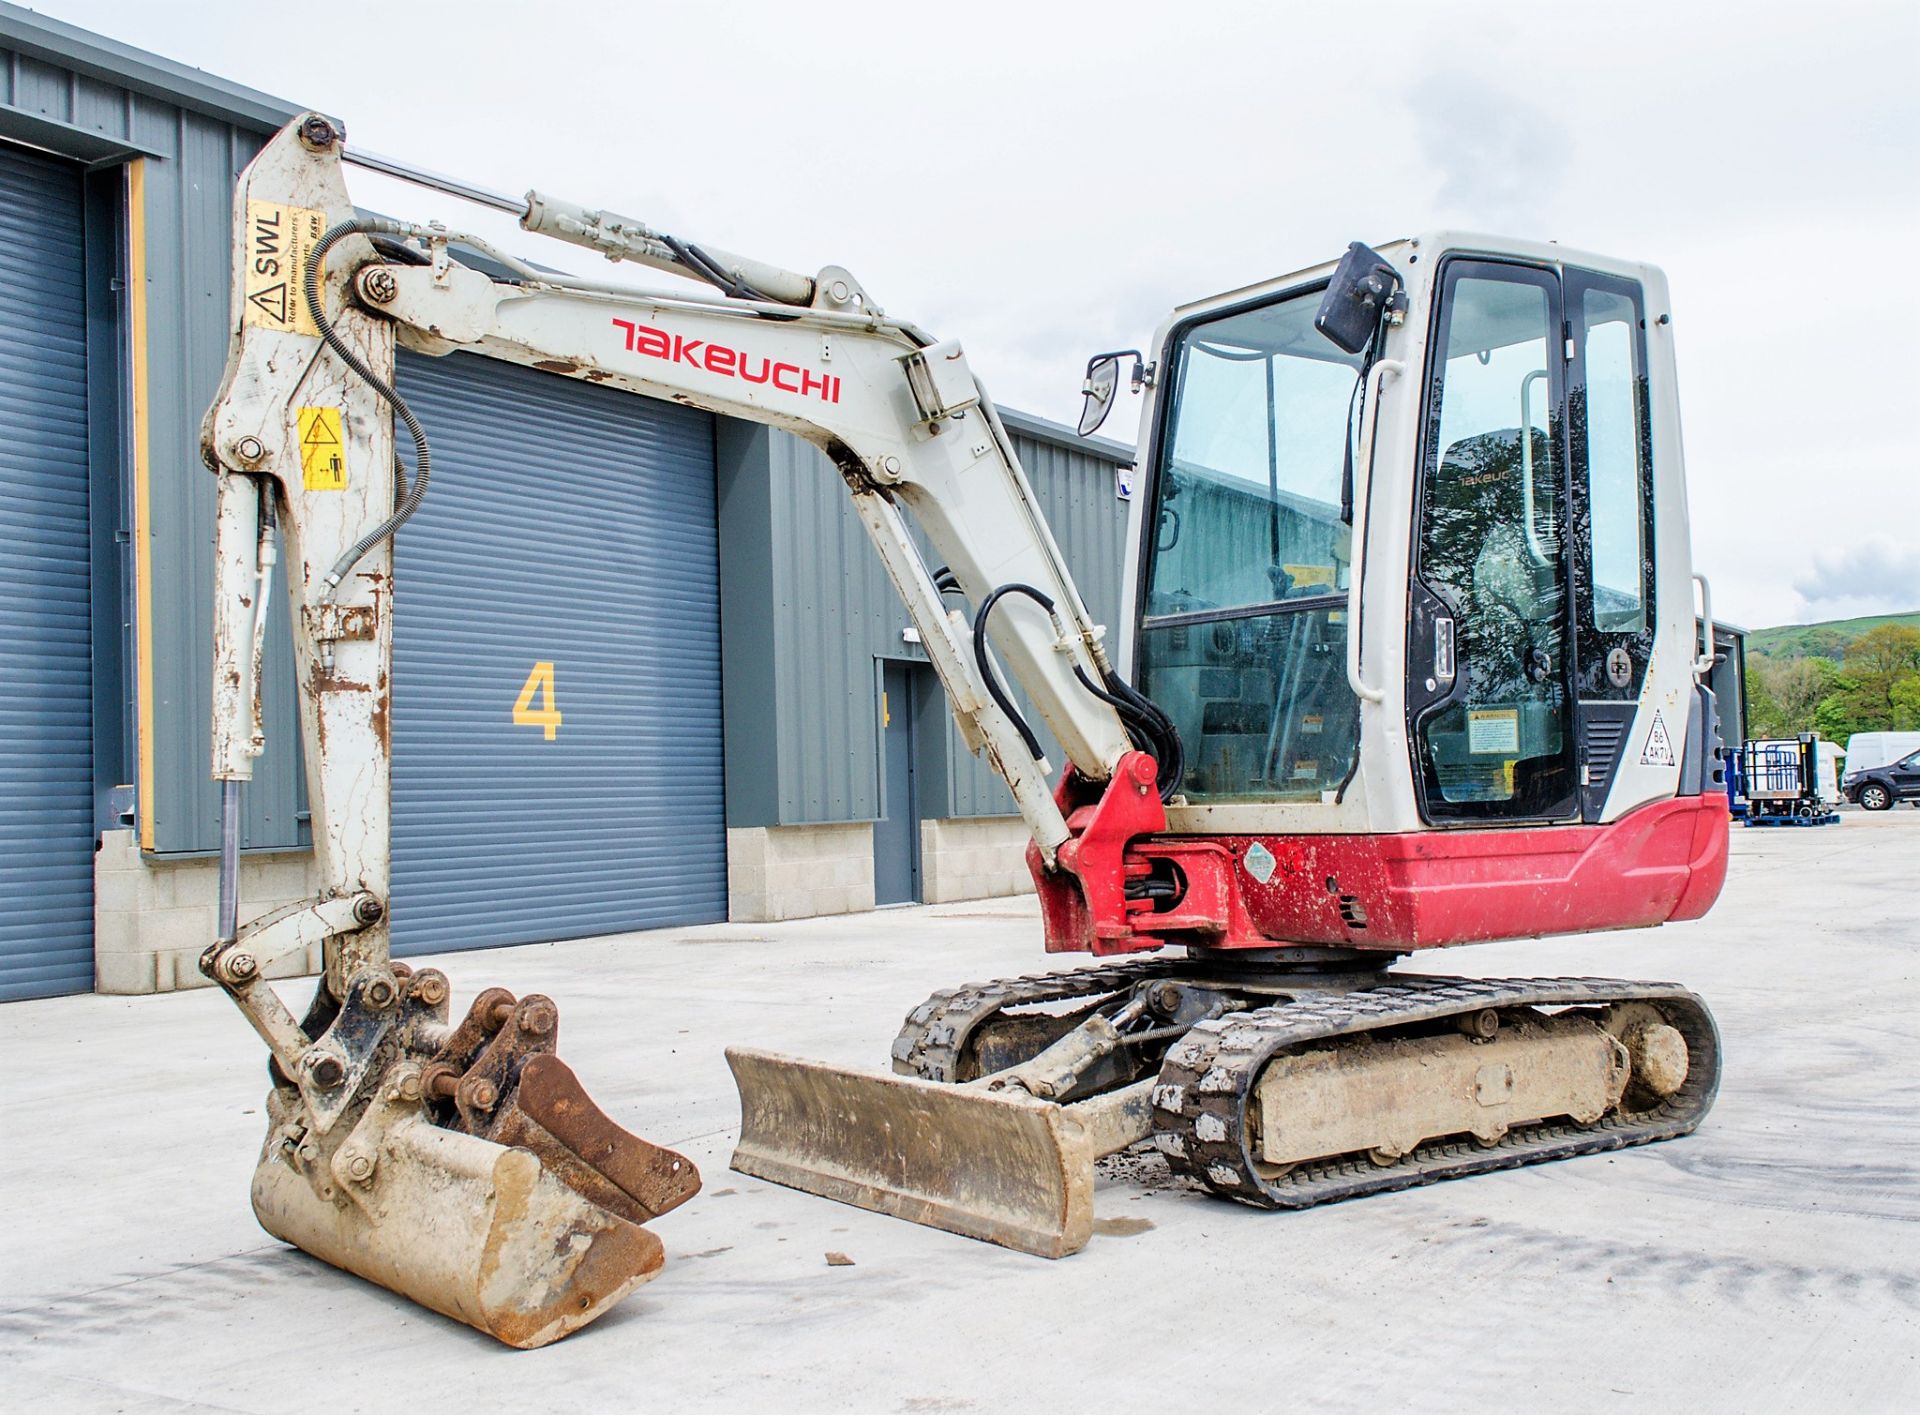 Takeuchi TB228 2.8 tonne rubber tracked mini excavator Year: 2015 S/N: 122804180 Recorded Hours: